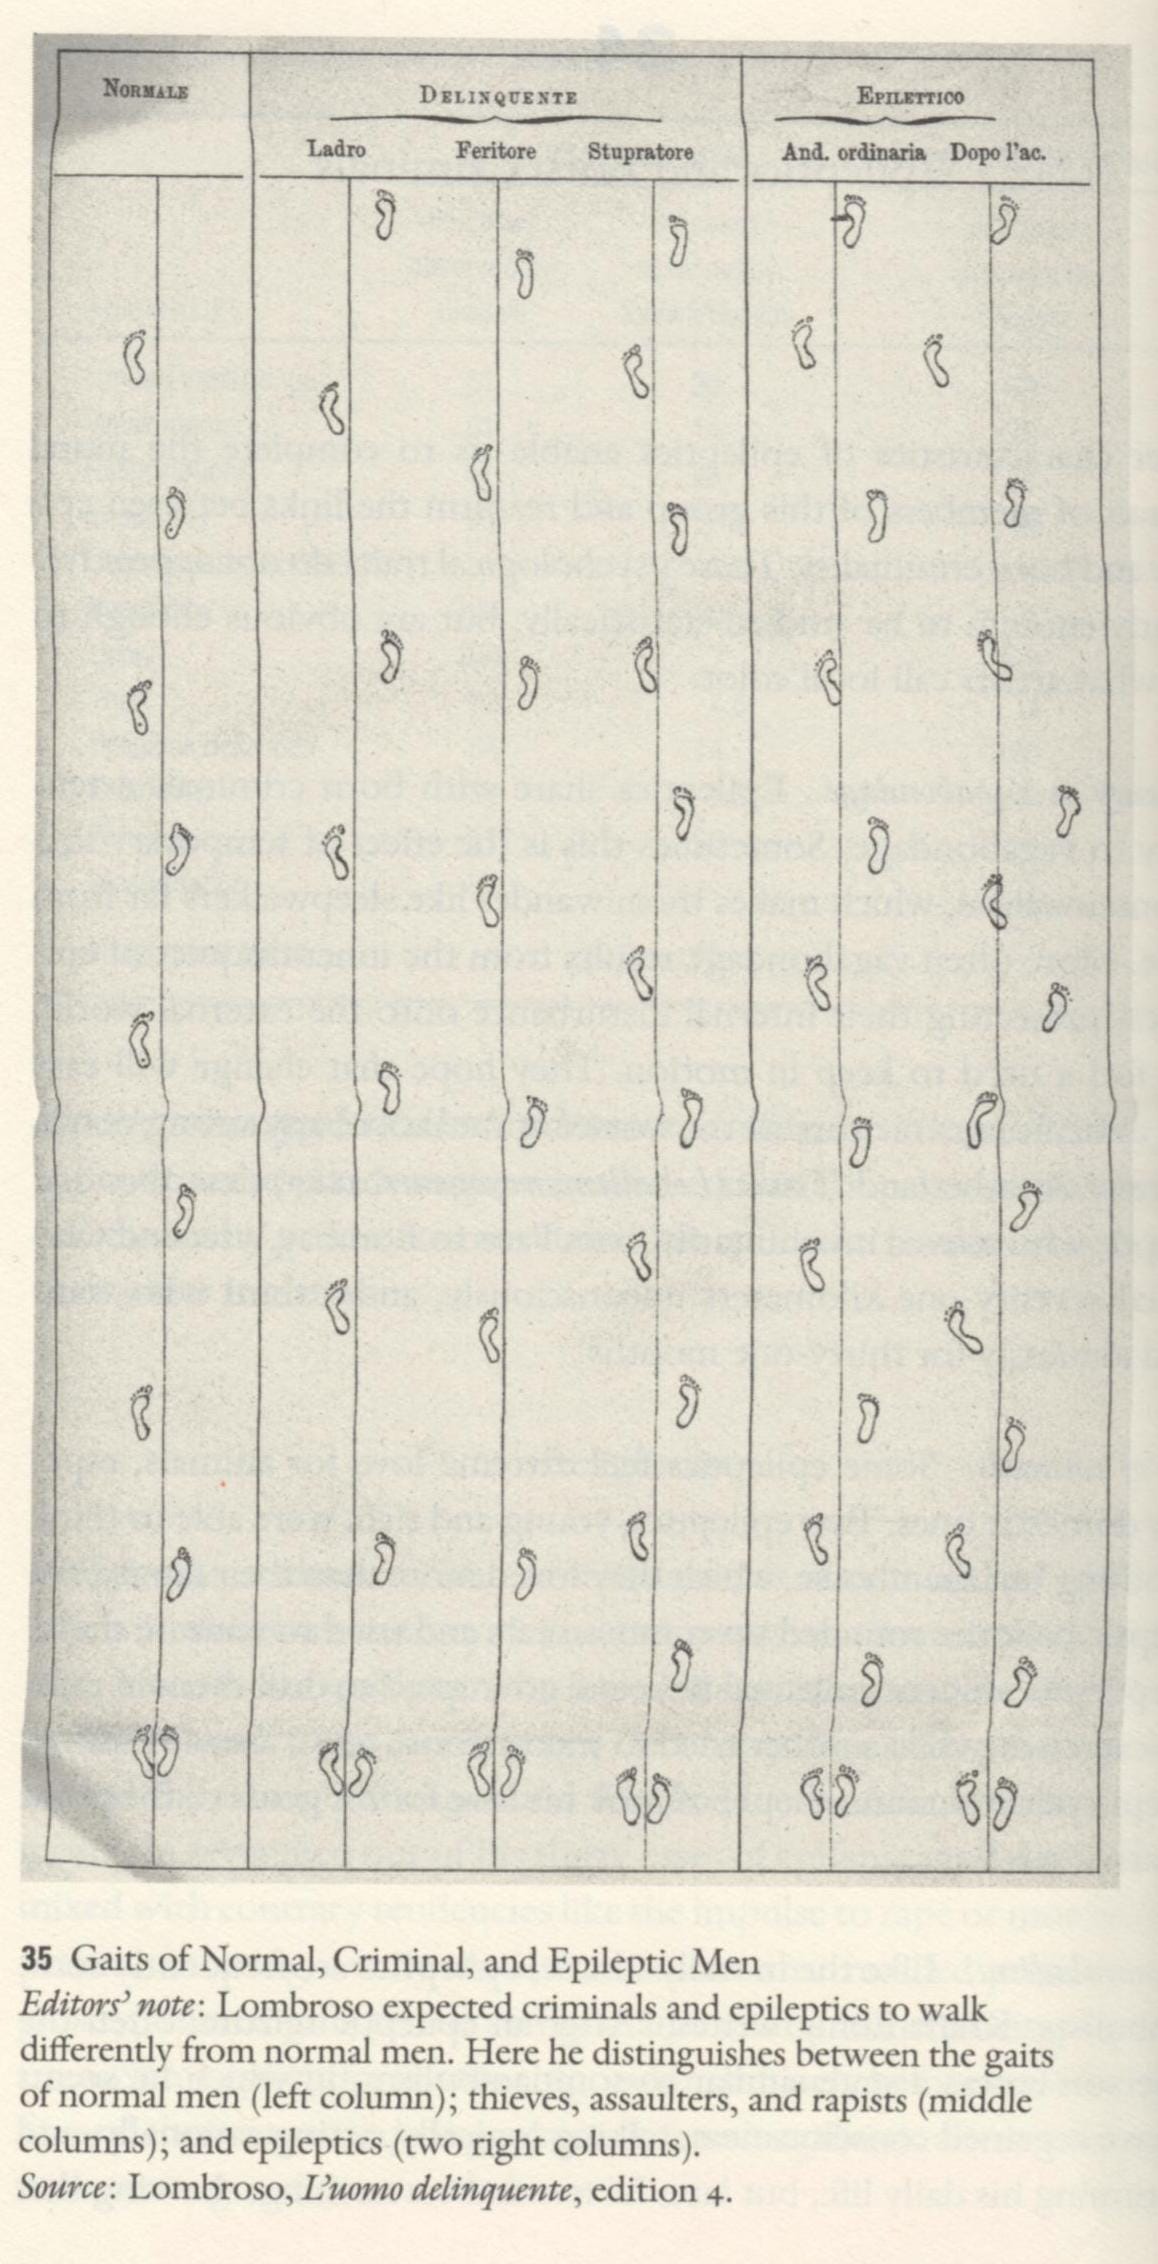 35 Gaits of Normal, Criminal, and Epileptic Men Editors' note: Lombroso expected criminals and epileptics to walk differently from normal men. Here he distinguishes between the gaits of normal men (left column); thieves, assaulters, and rapists (middle columns); and epileptics (two right columns). Source: Lombroso, L'vomo delinquente, edition 4.